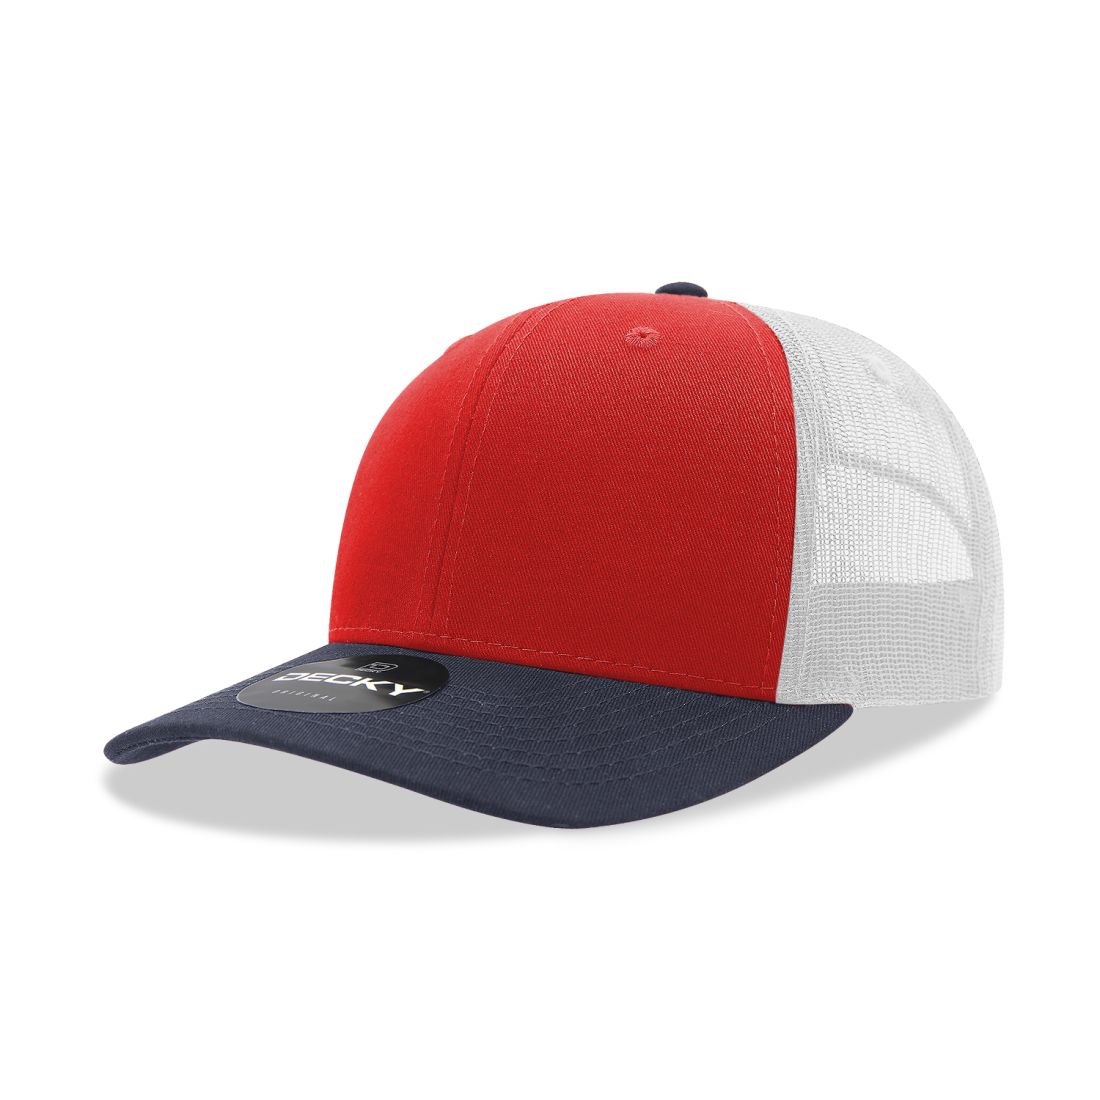 Navy/Red/White color variant